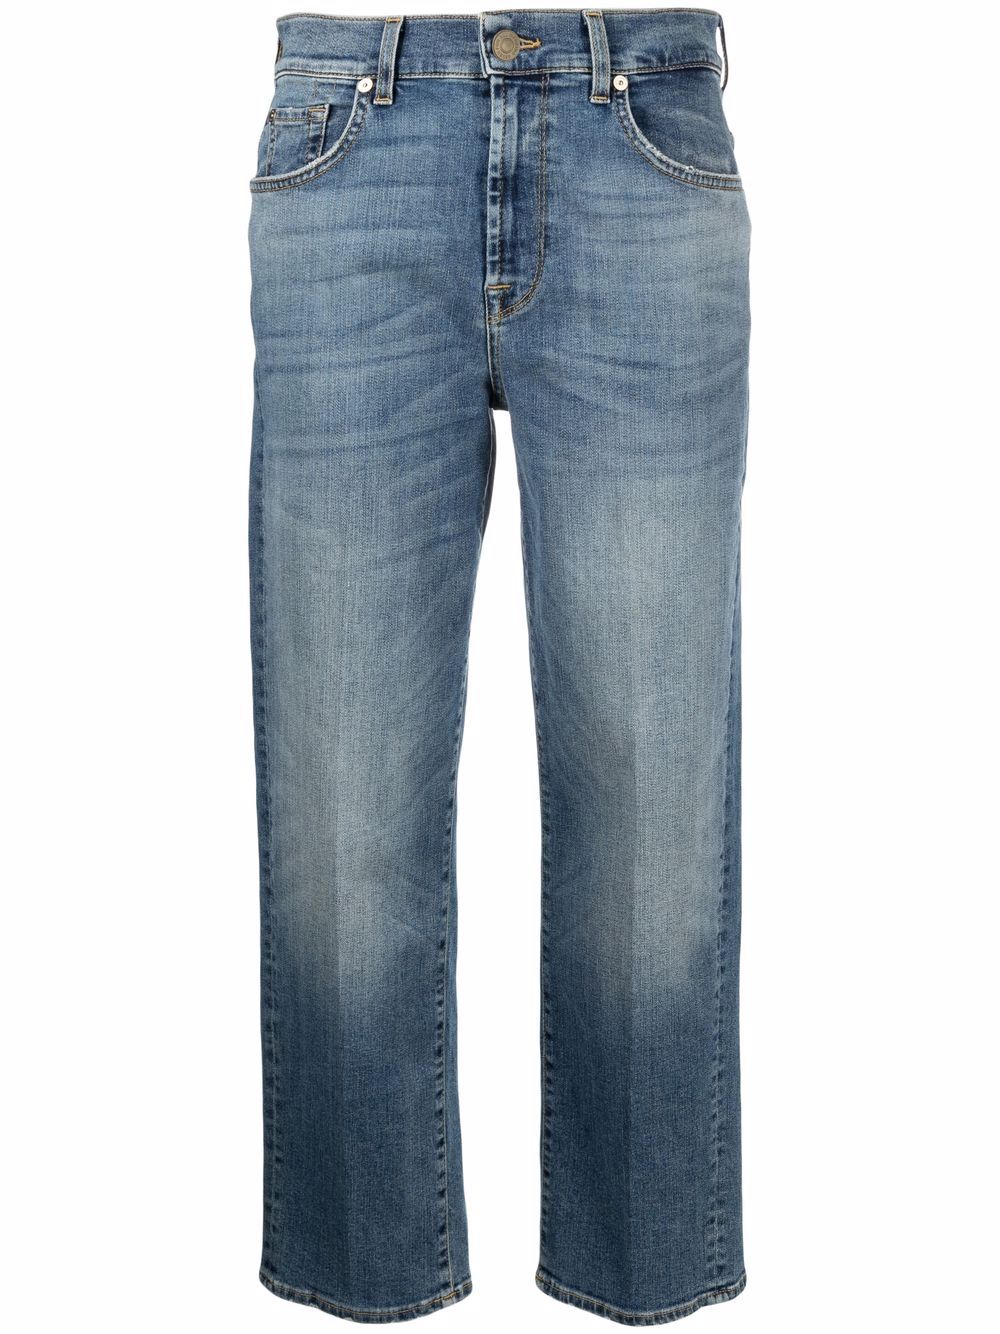 7 For All Mankind cropped leg jeans - Blue von 7 For All Mankind